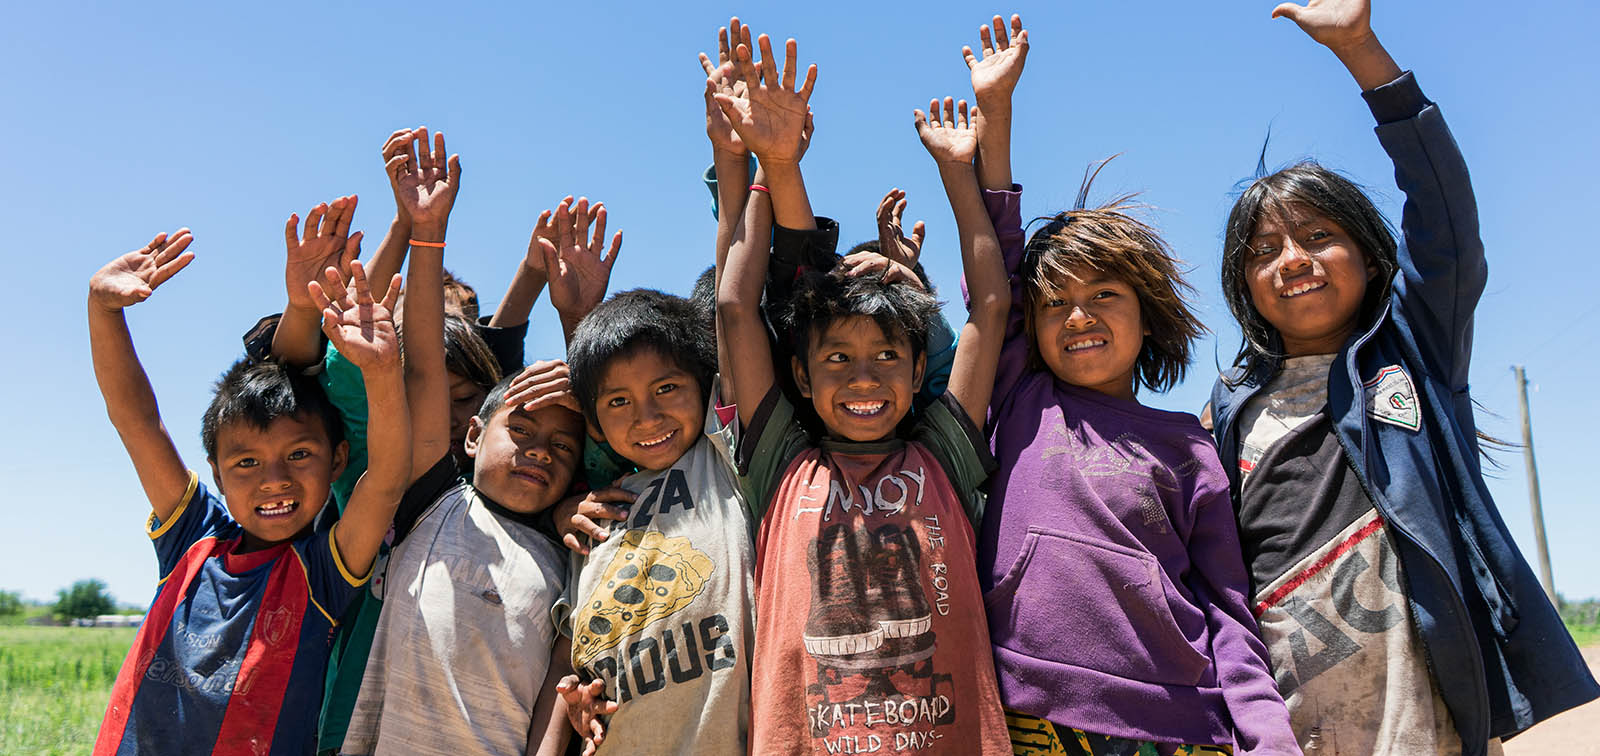 Children in the Tres Palmas community in Paraguay's Chaco region